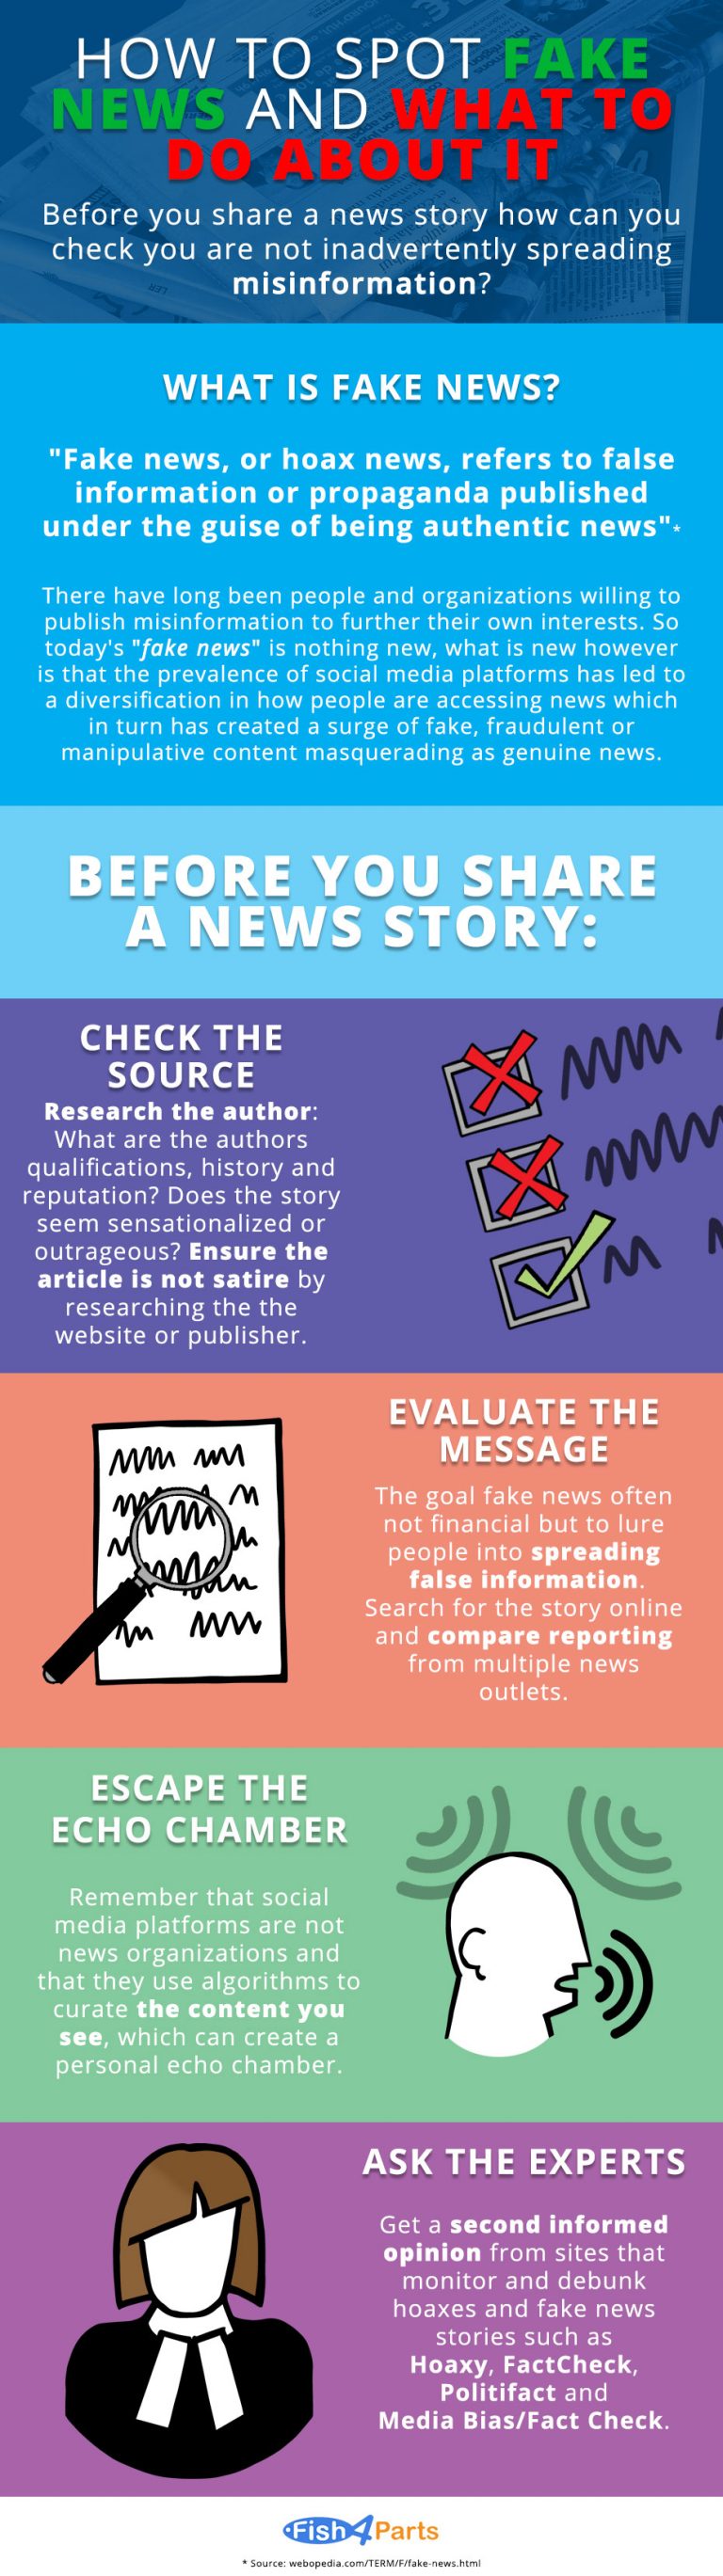 How To Spot Fake News And What To Do About It INFOGRAPHIC 17100 | Hot ...